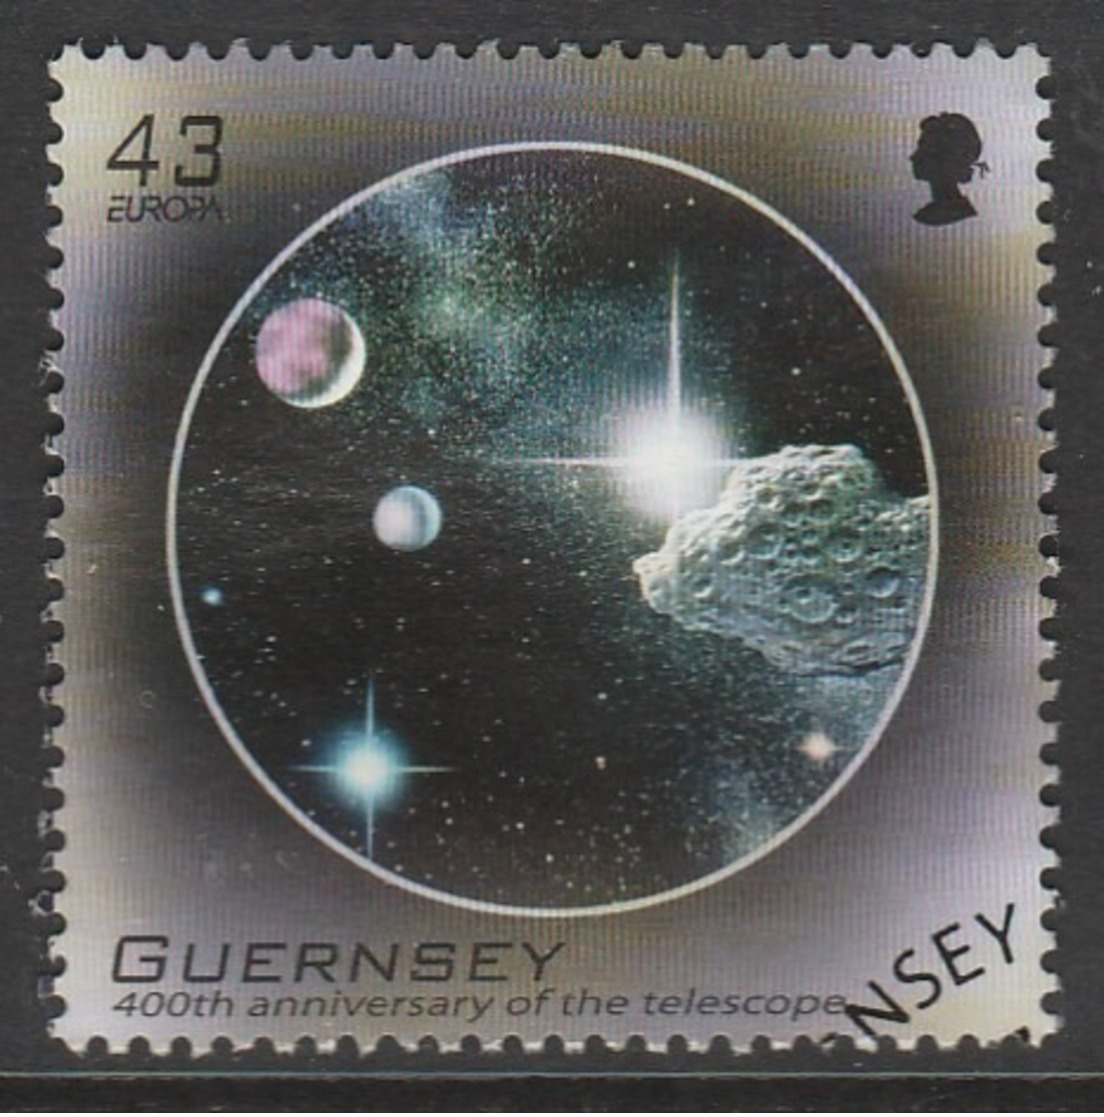 Guernsey 2009 EUROPA Stamps - Astronomy 43 P Multicoloured SW 1235 O Used - Guernsey